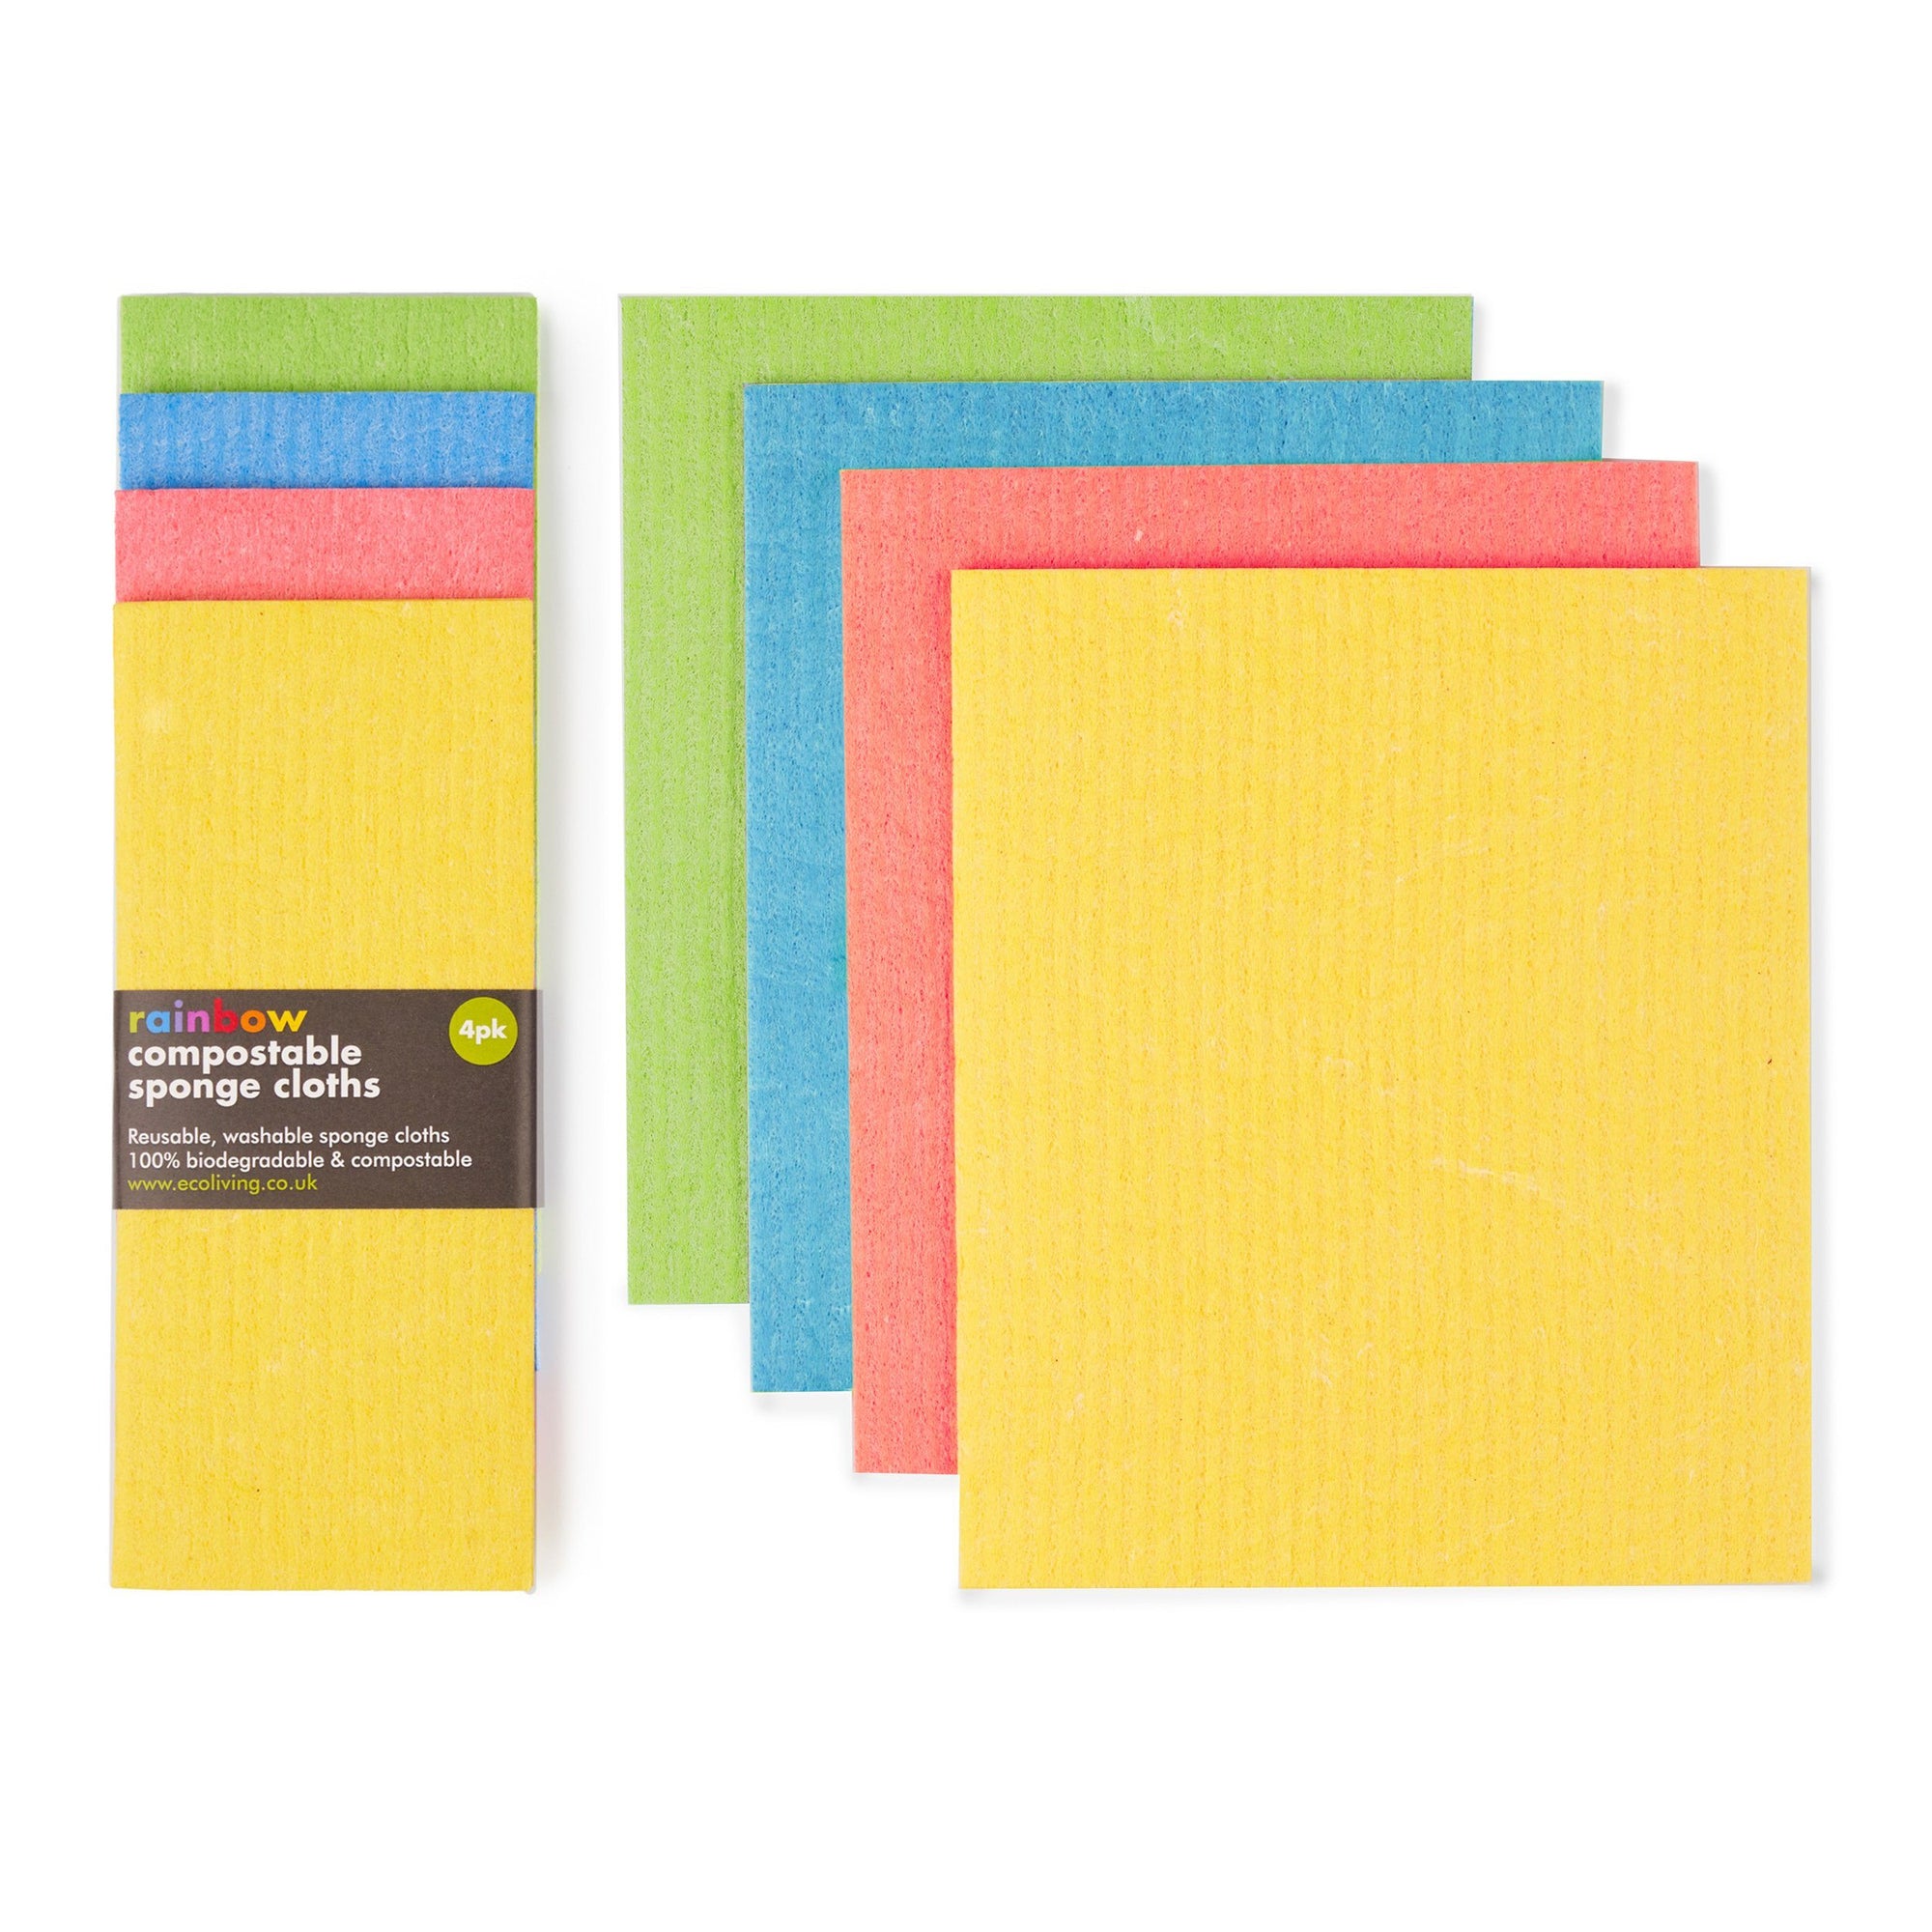 Compostable Sponge Cleaning Cloths. 4 Pack Elephant Box 